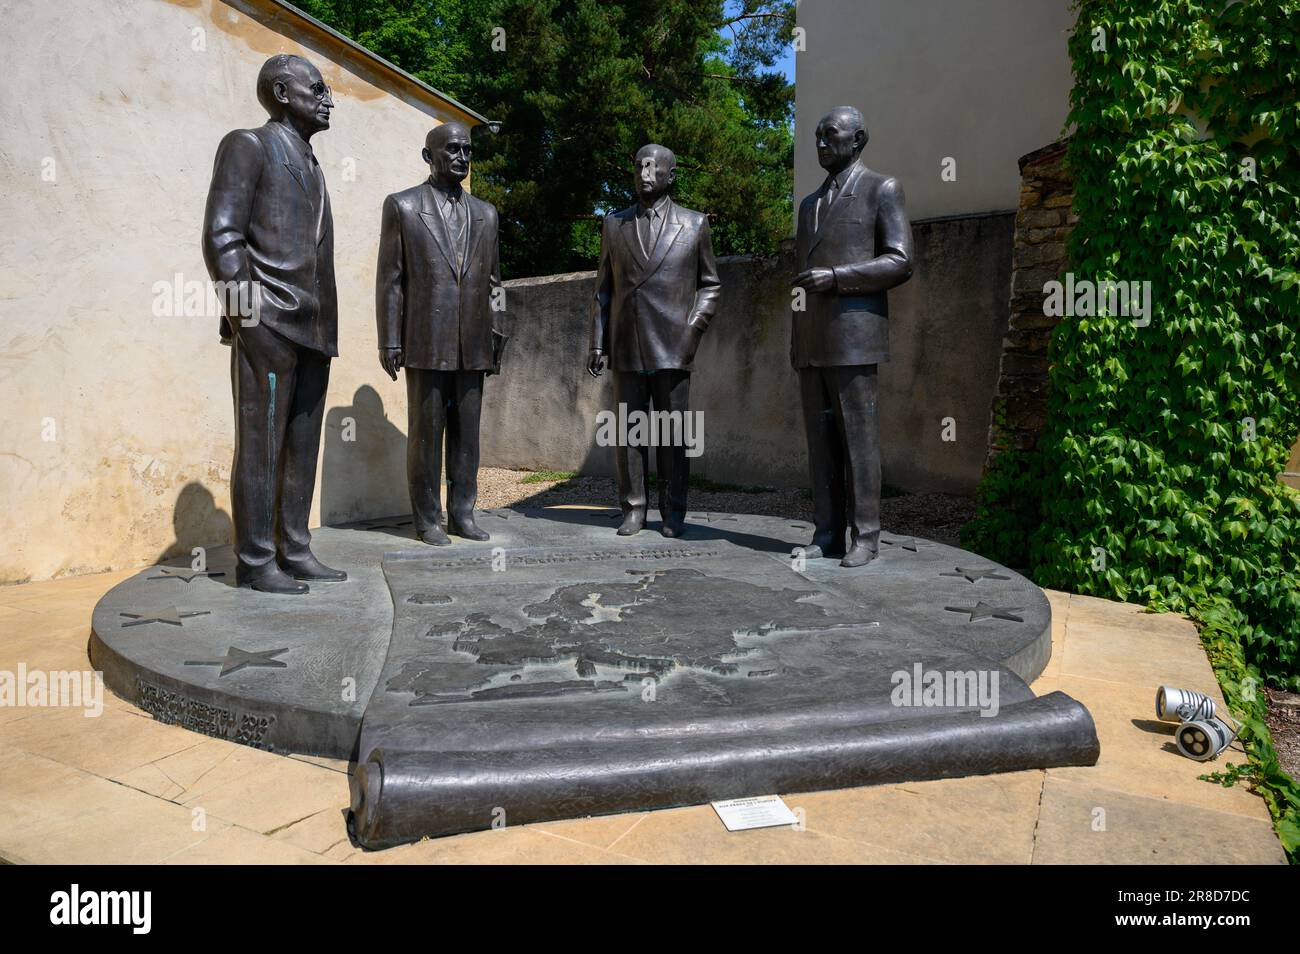 The monument 'Homage to the Founding Fathers of Europe' in front of Schuman's house in Scy-Chazelles by the Russian artist Zurab Tsereteli. Stock Photo